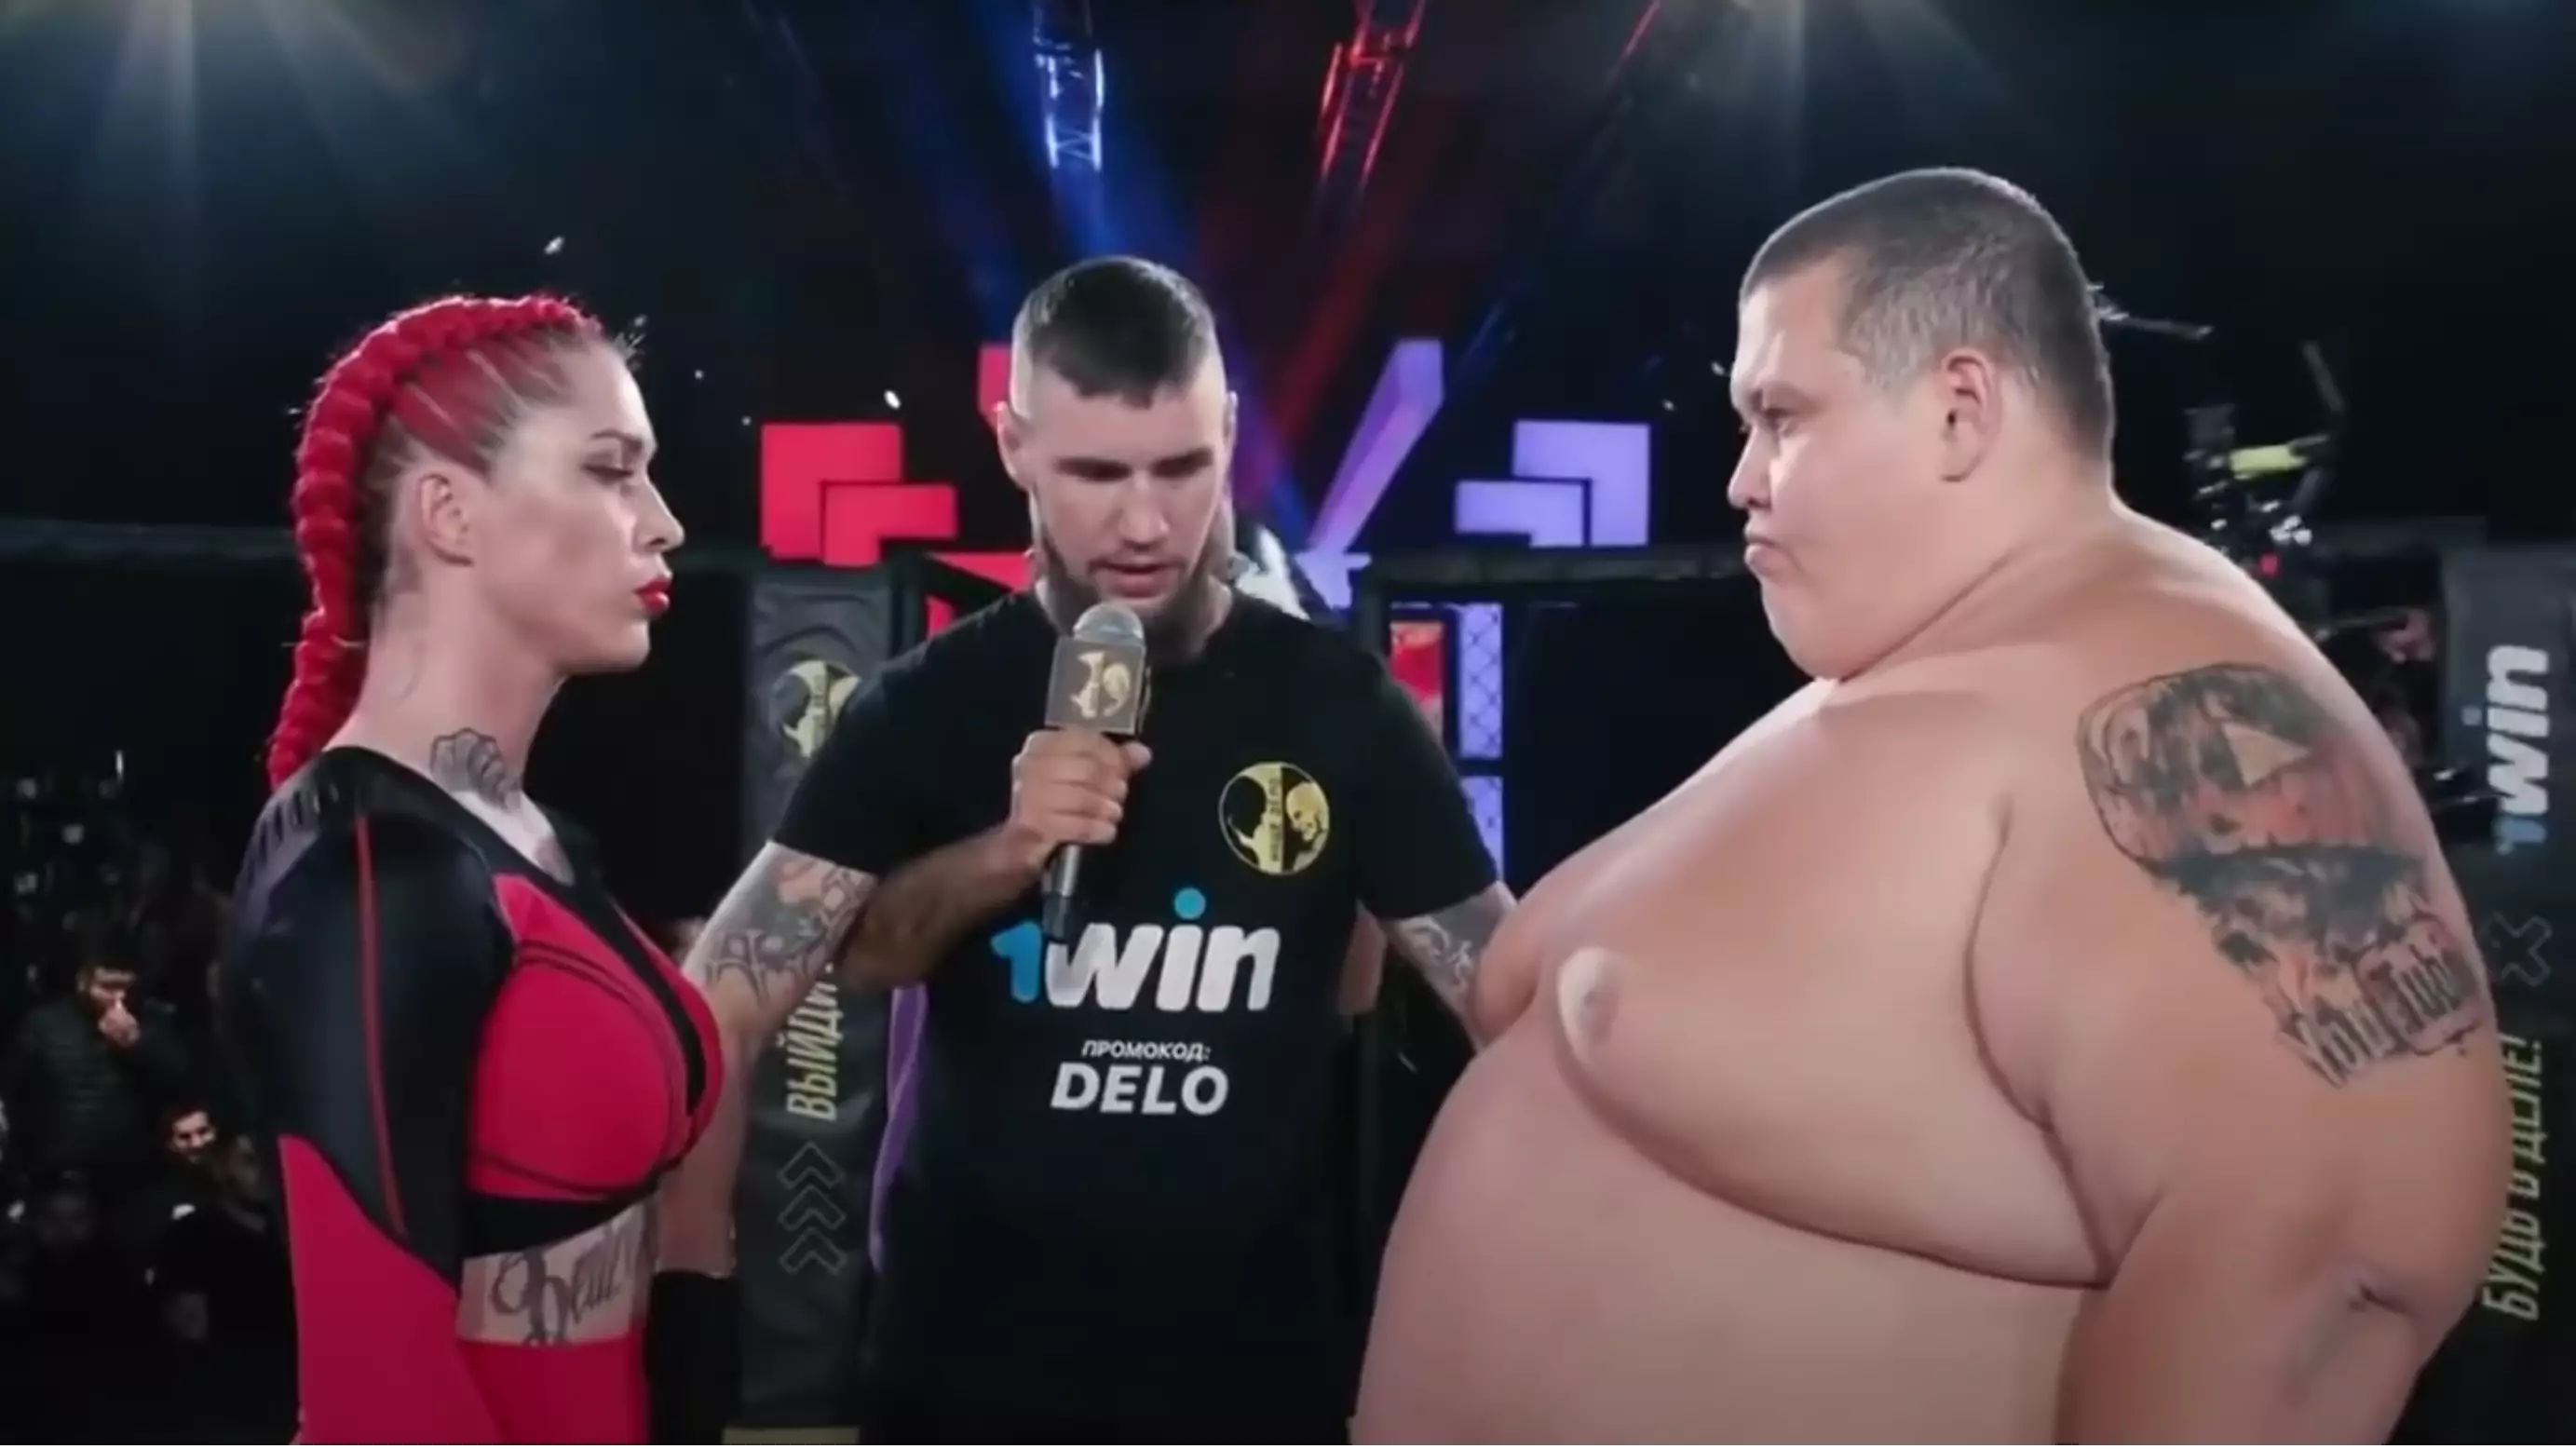 Most Bizarre MMA Bout Ever Sees 139-Pound Female Fighter Knock Out 529-Pound Bloke